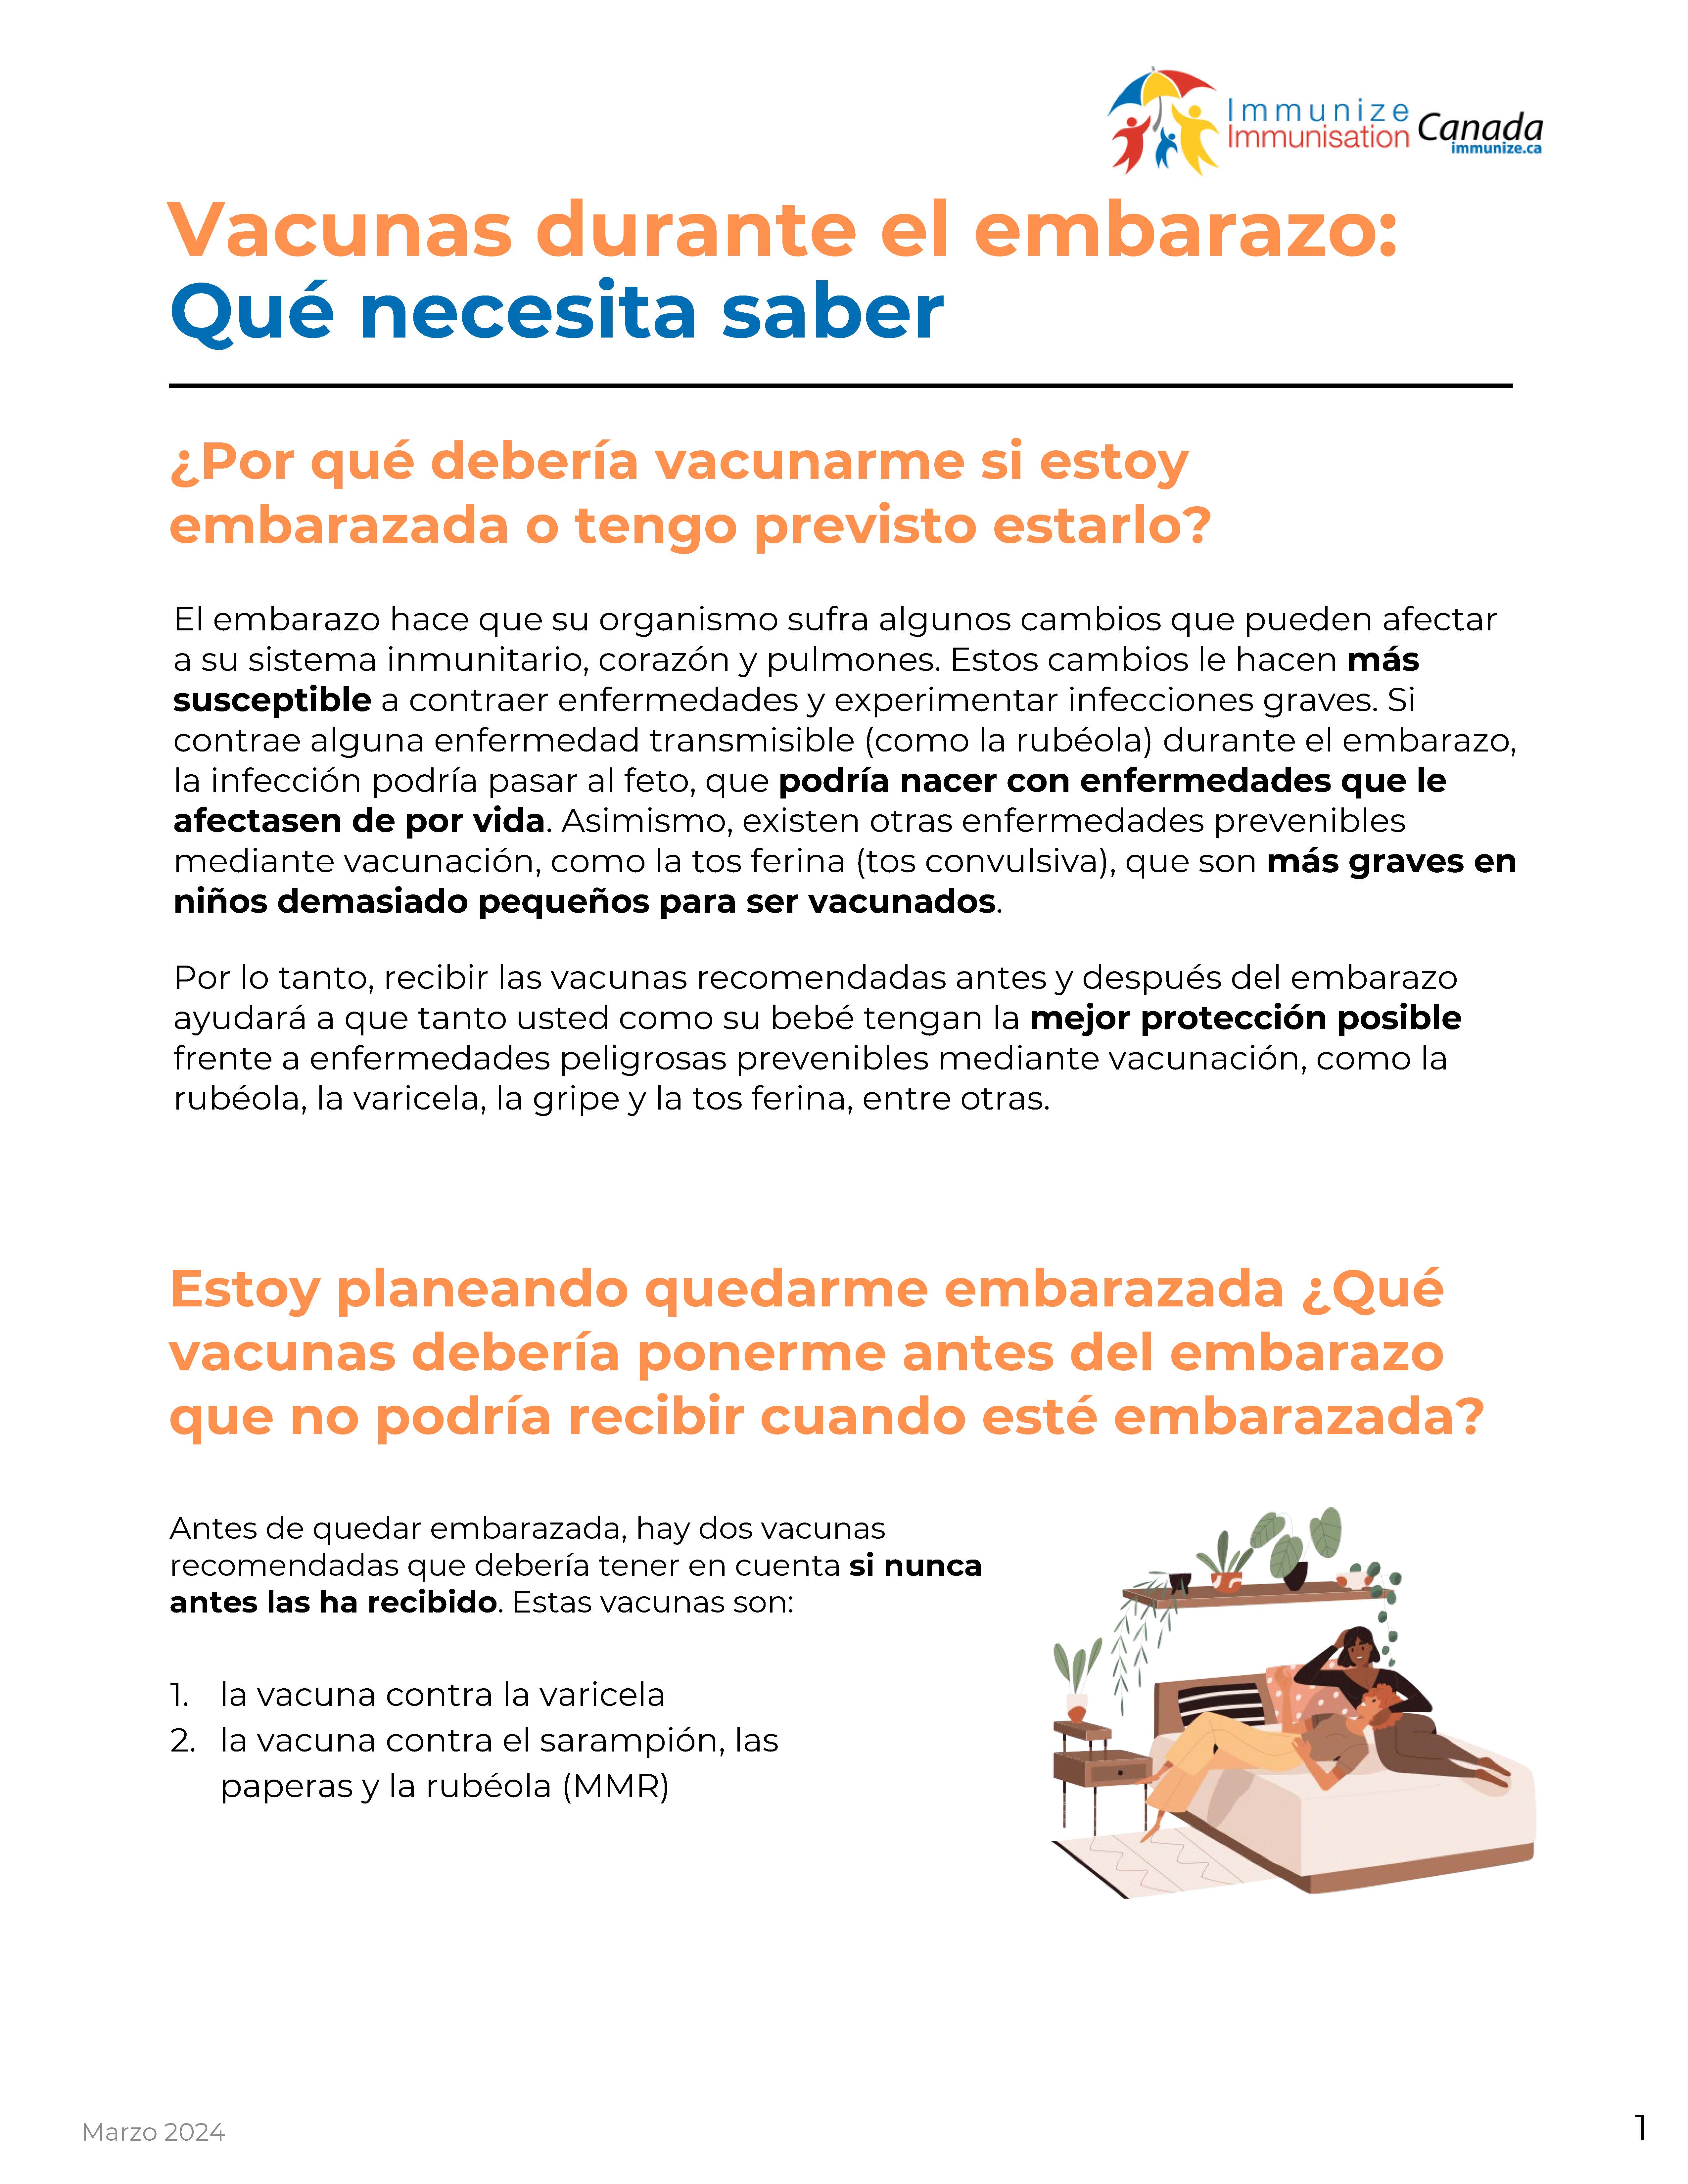 Vaccines in Pregnancy: What you need to know (factsheet in Spanish)